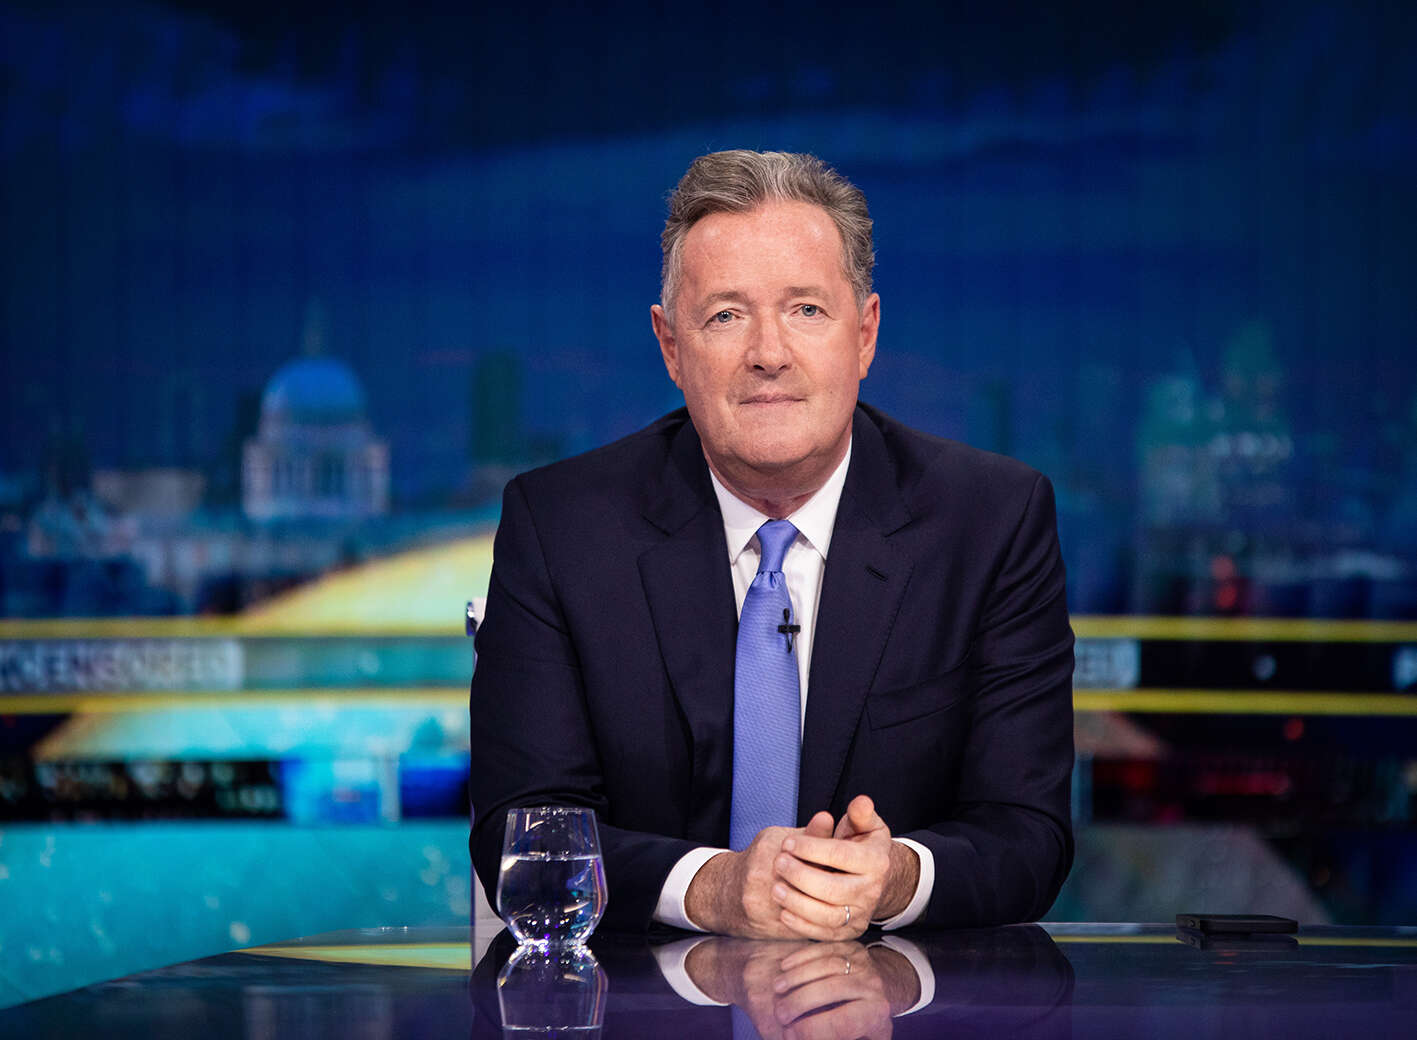 Why are Piers Morgan's TalkTV ratings so low?